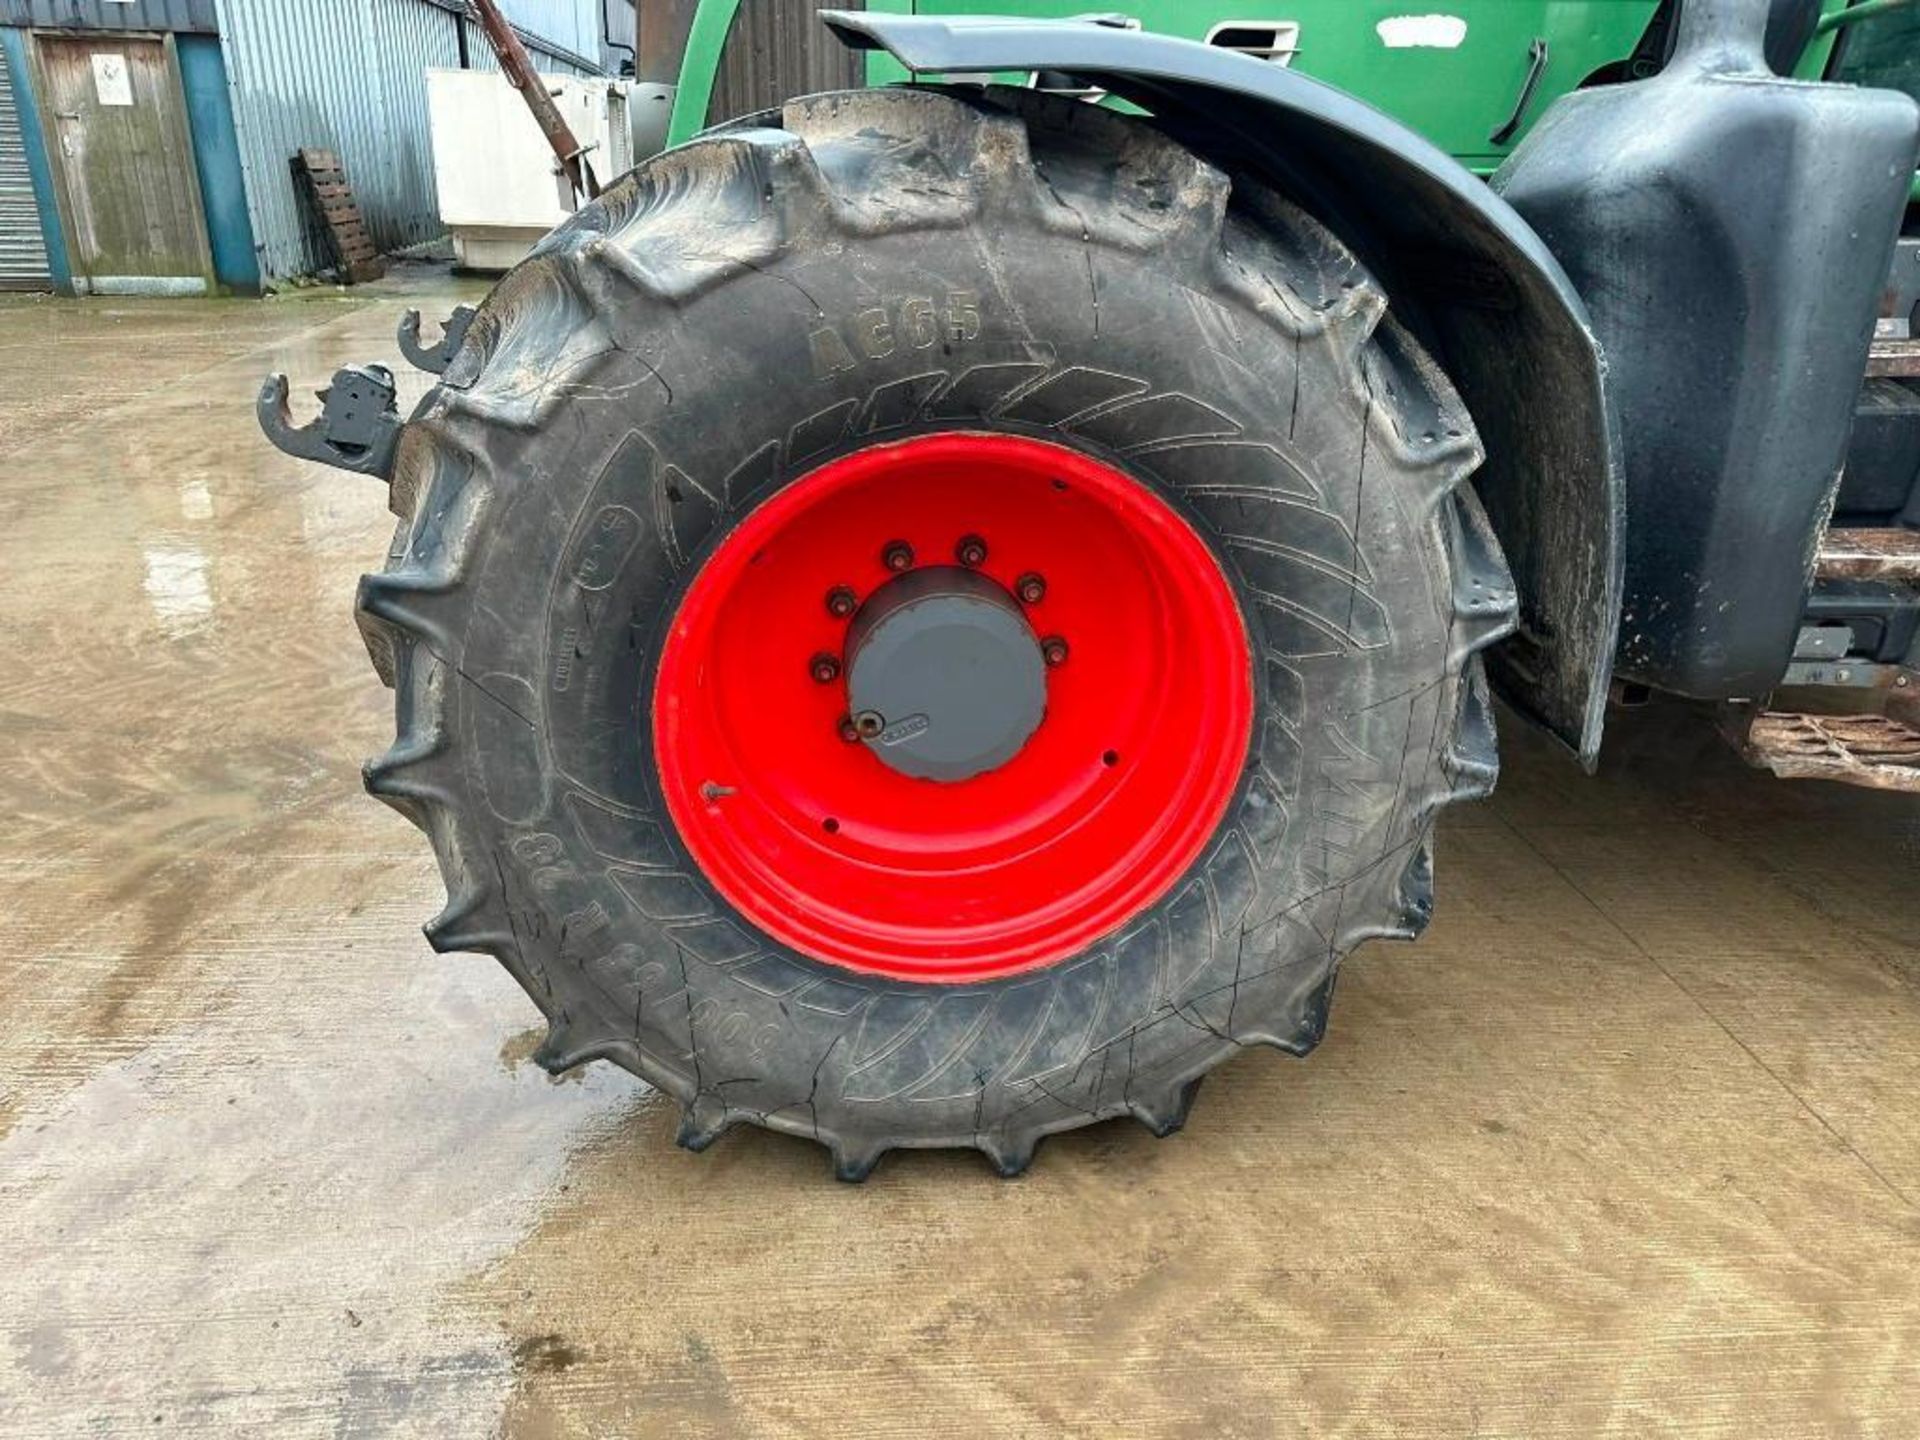 2010 Fendt 820 Vario TMS tractor, 4wd, front linkage, 4No spool valves, Bill Bennett pick up hitch. - Image 19 of 21